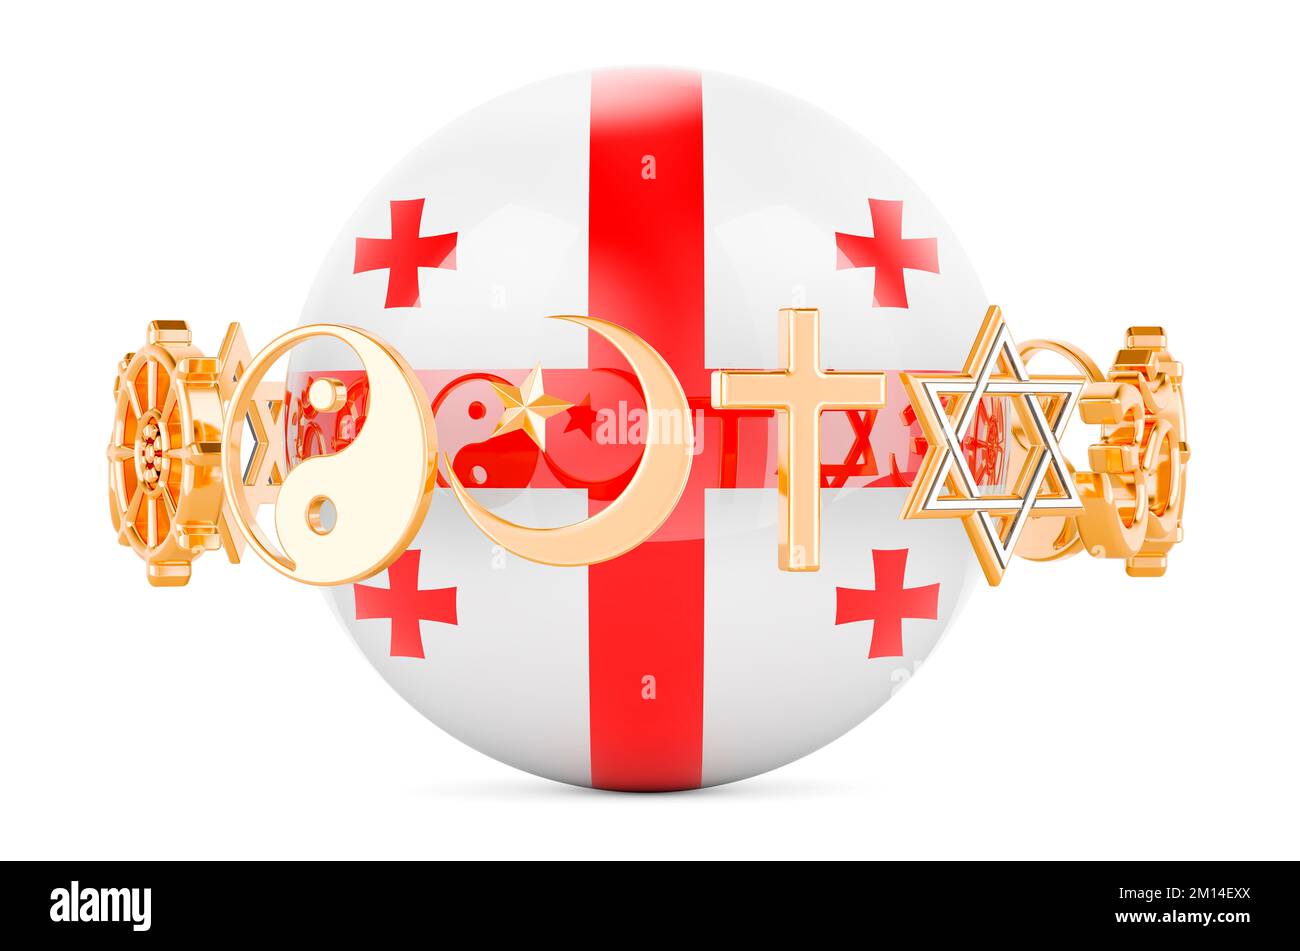 Georgian flag painted on sphere with religions symbols around, 3D rendering isolated on white background Stock Photo